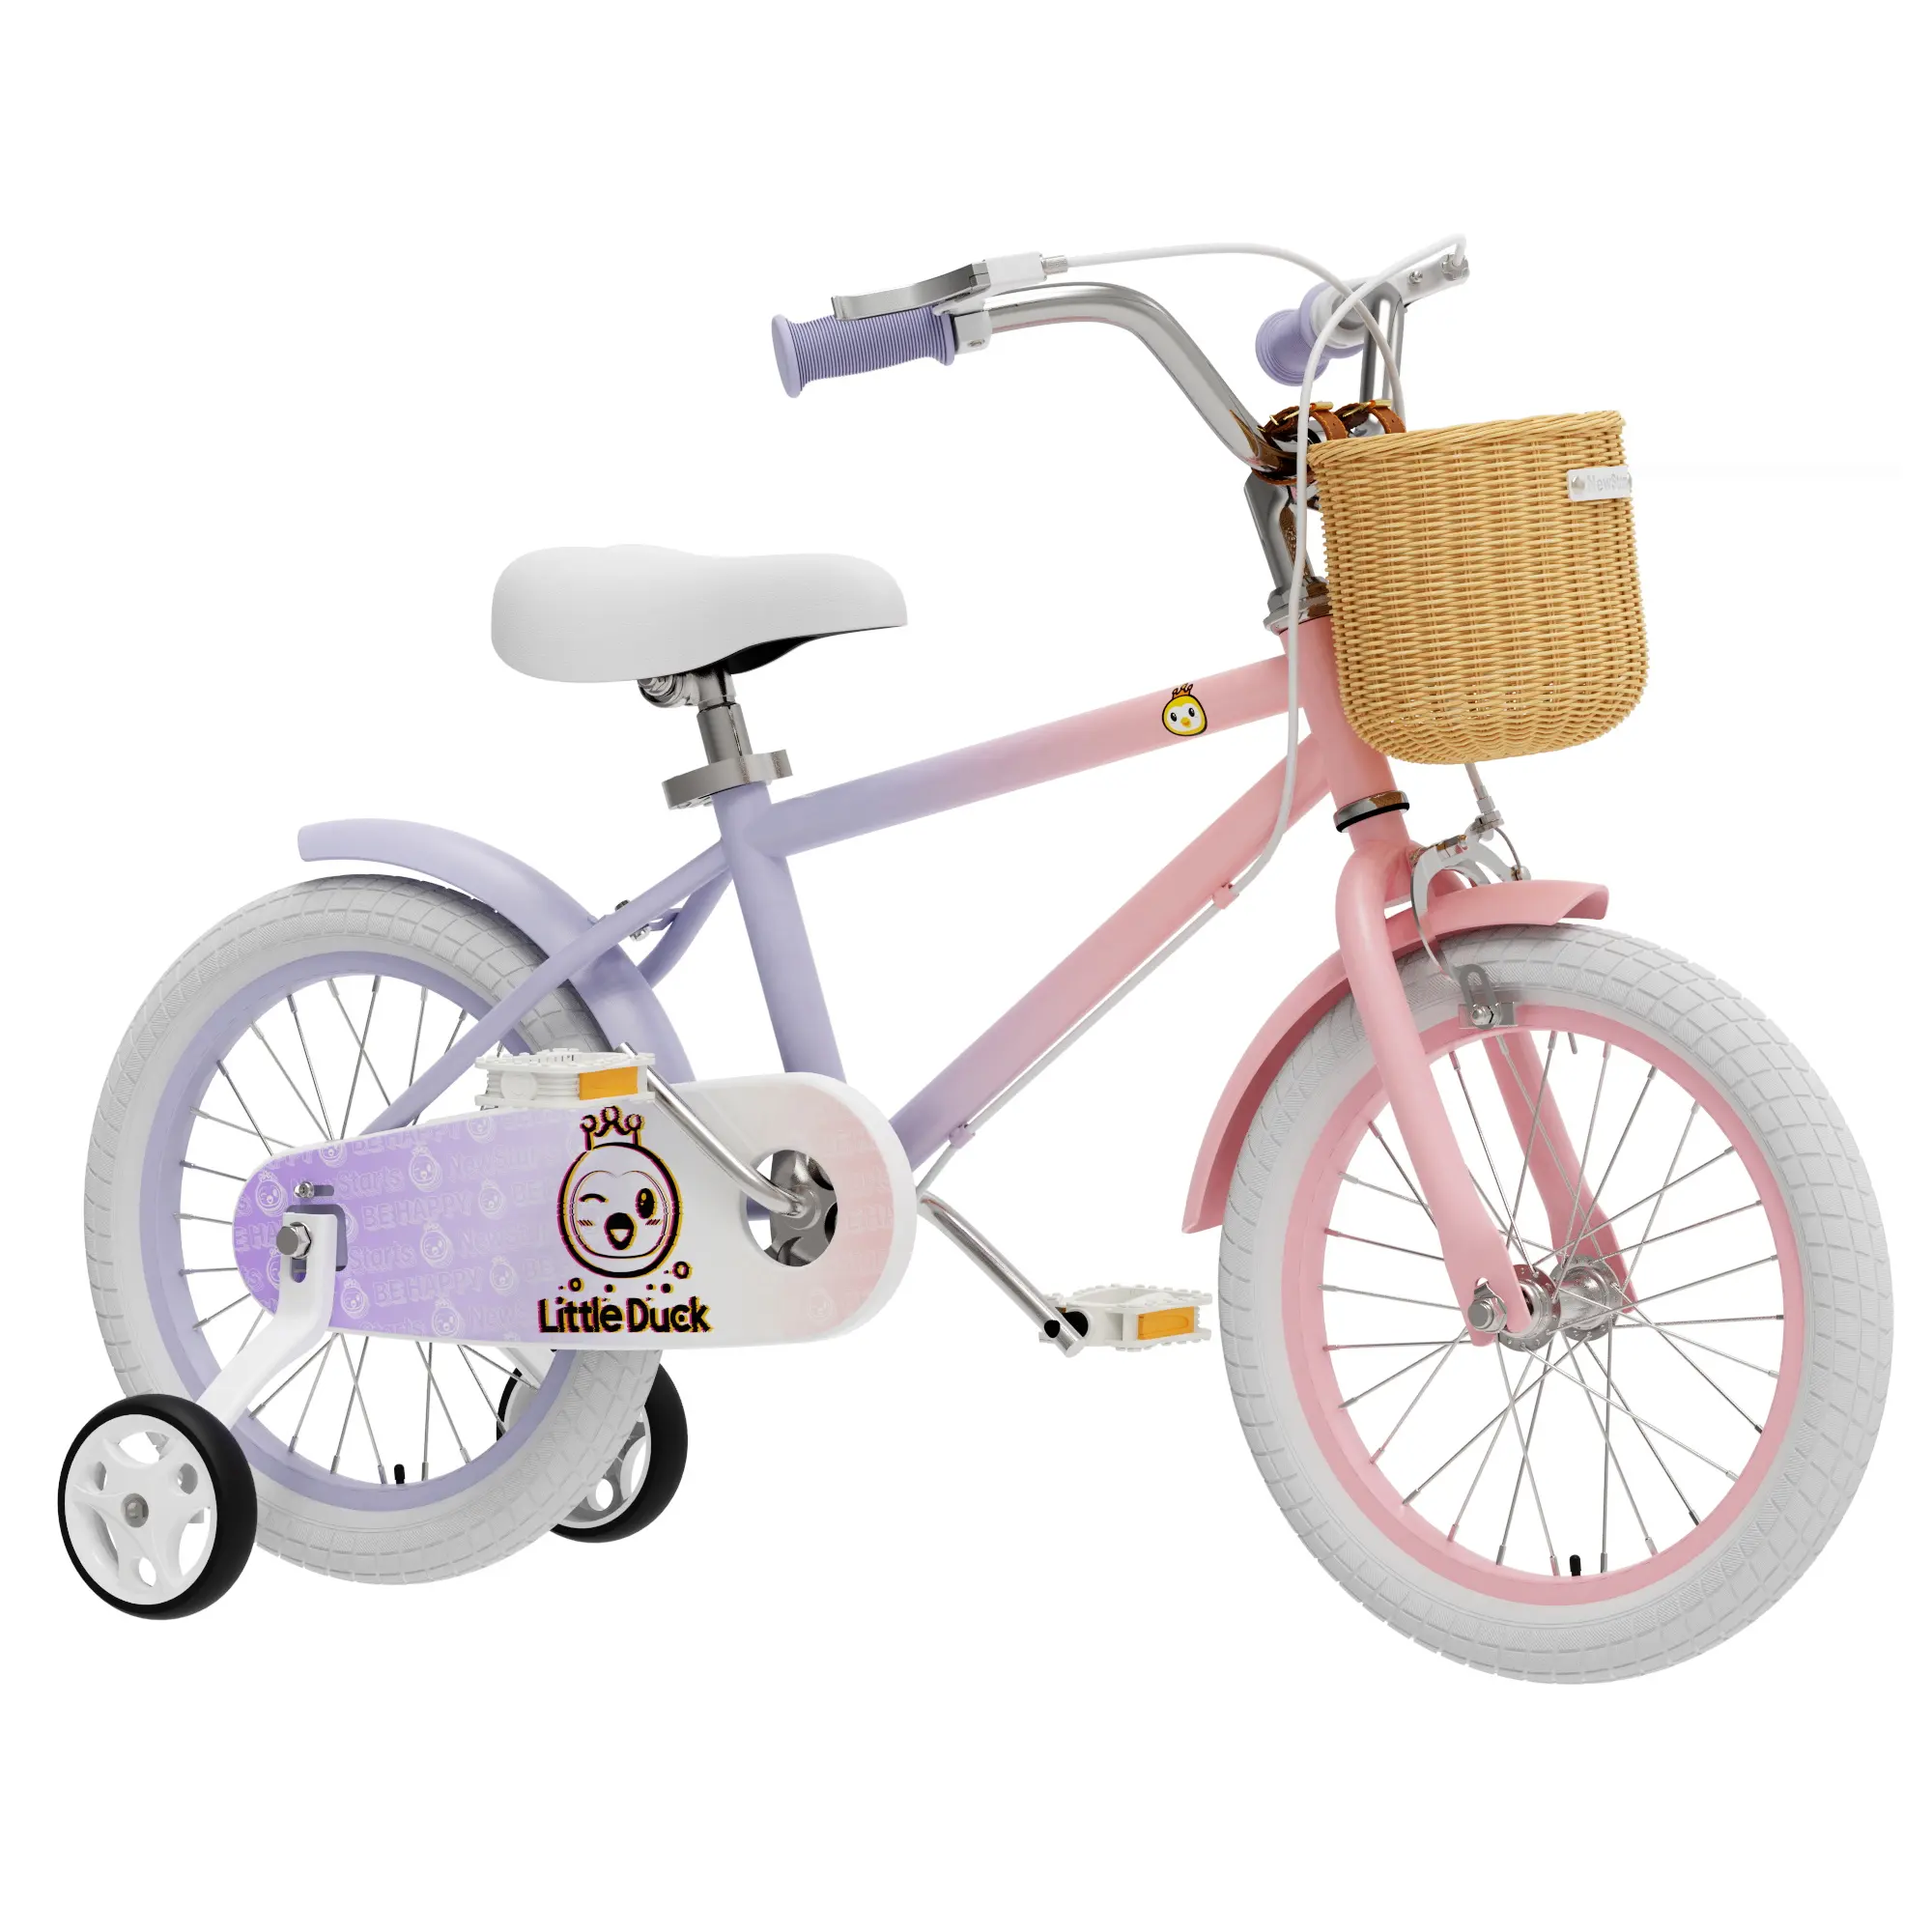 Beautiful Model Pink Color White Tire 16 Inch Kids Bicycle Child Running Bikes Girls Bicycle with Training Wheels For 3-7 Years